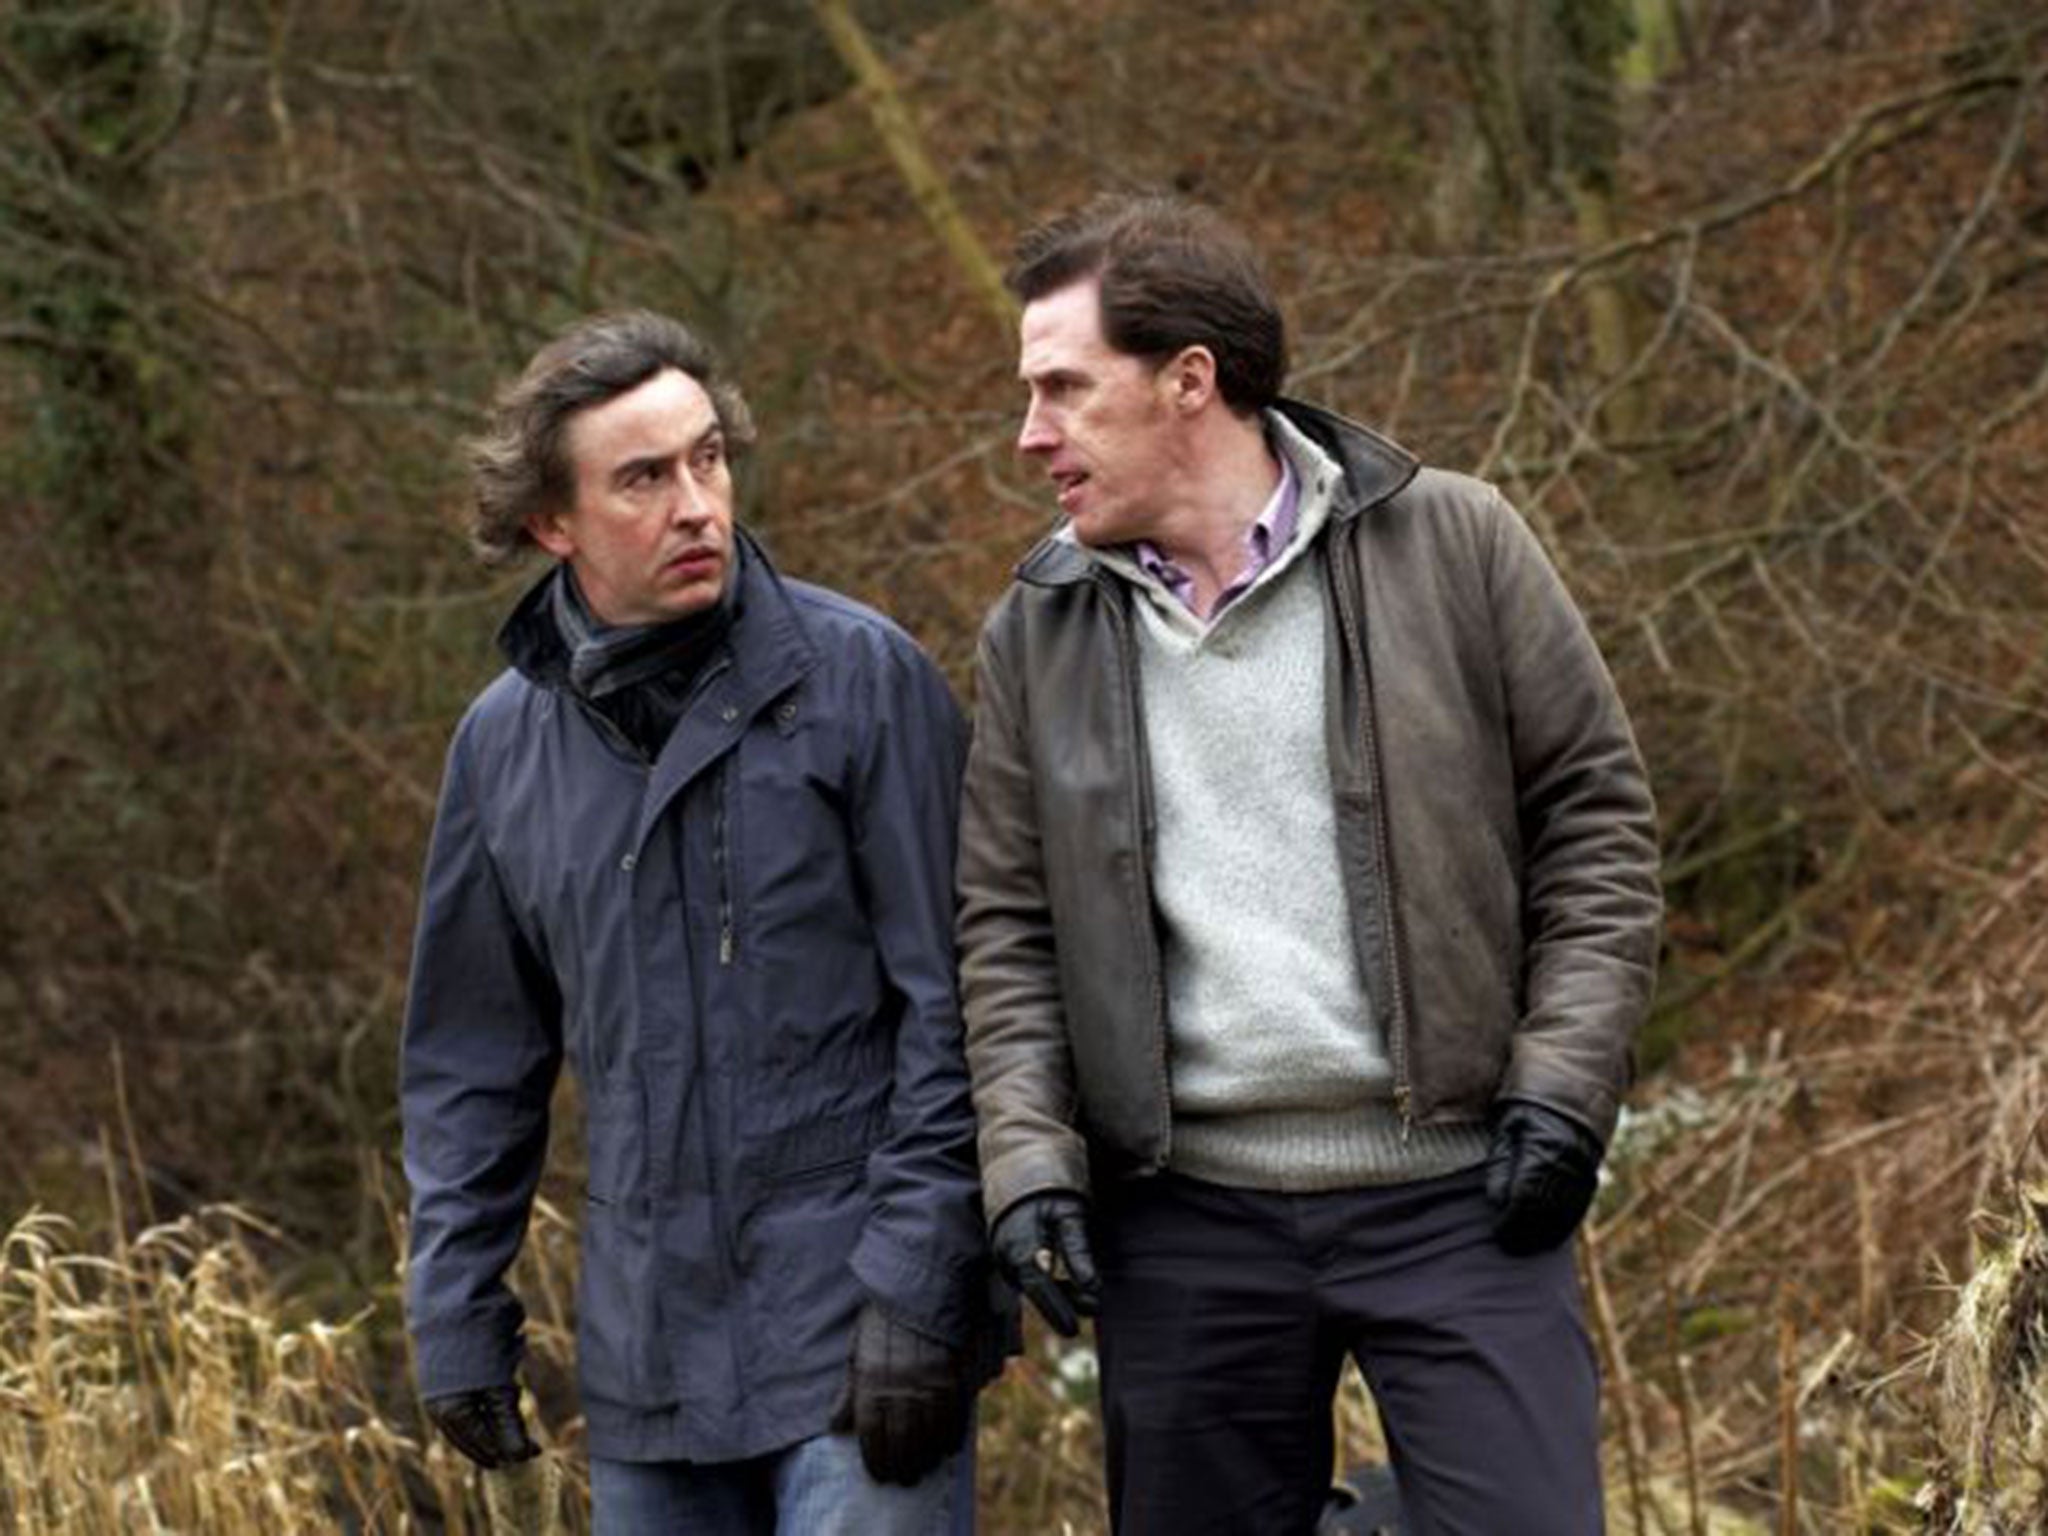 Steve Coogan and Rob Brydon in BBC's 'The Trip'